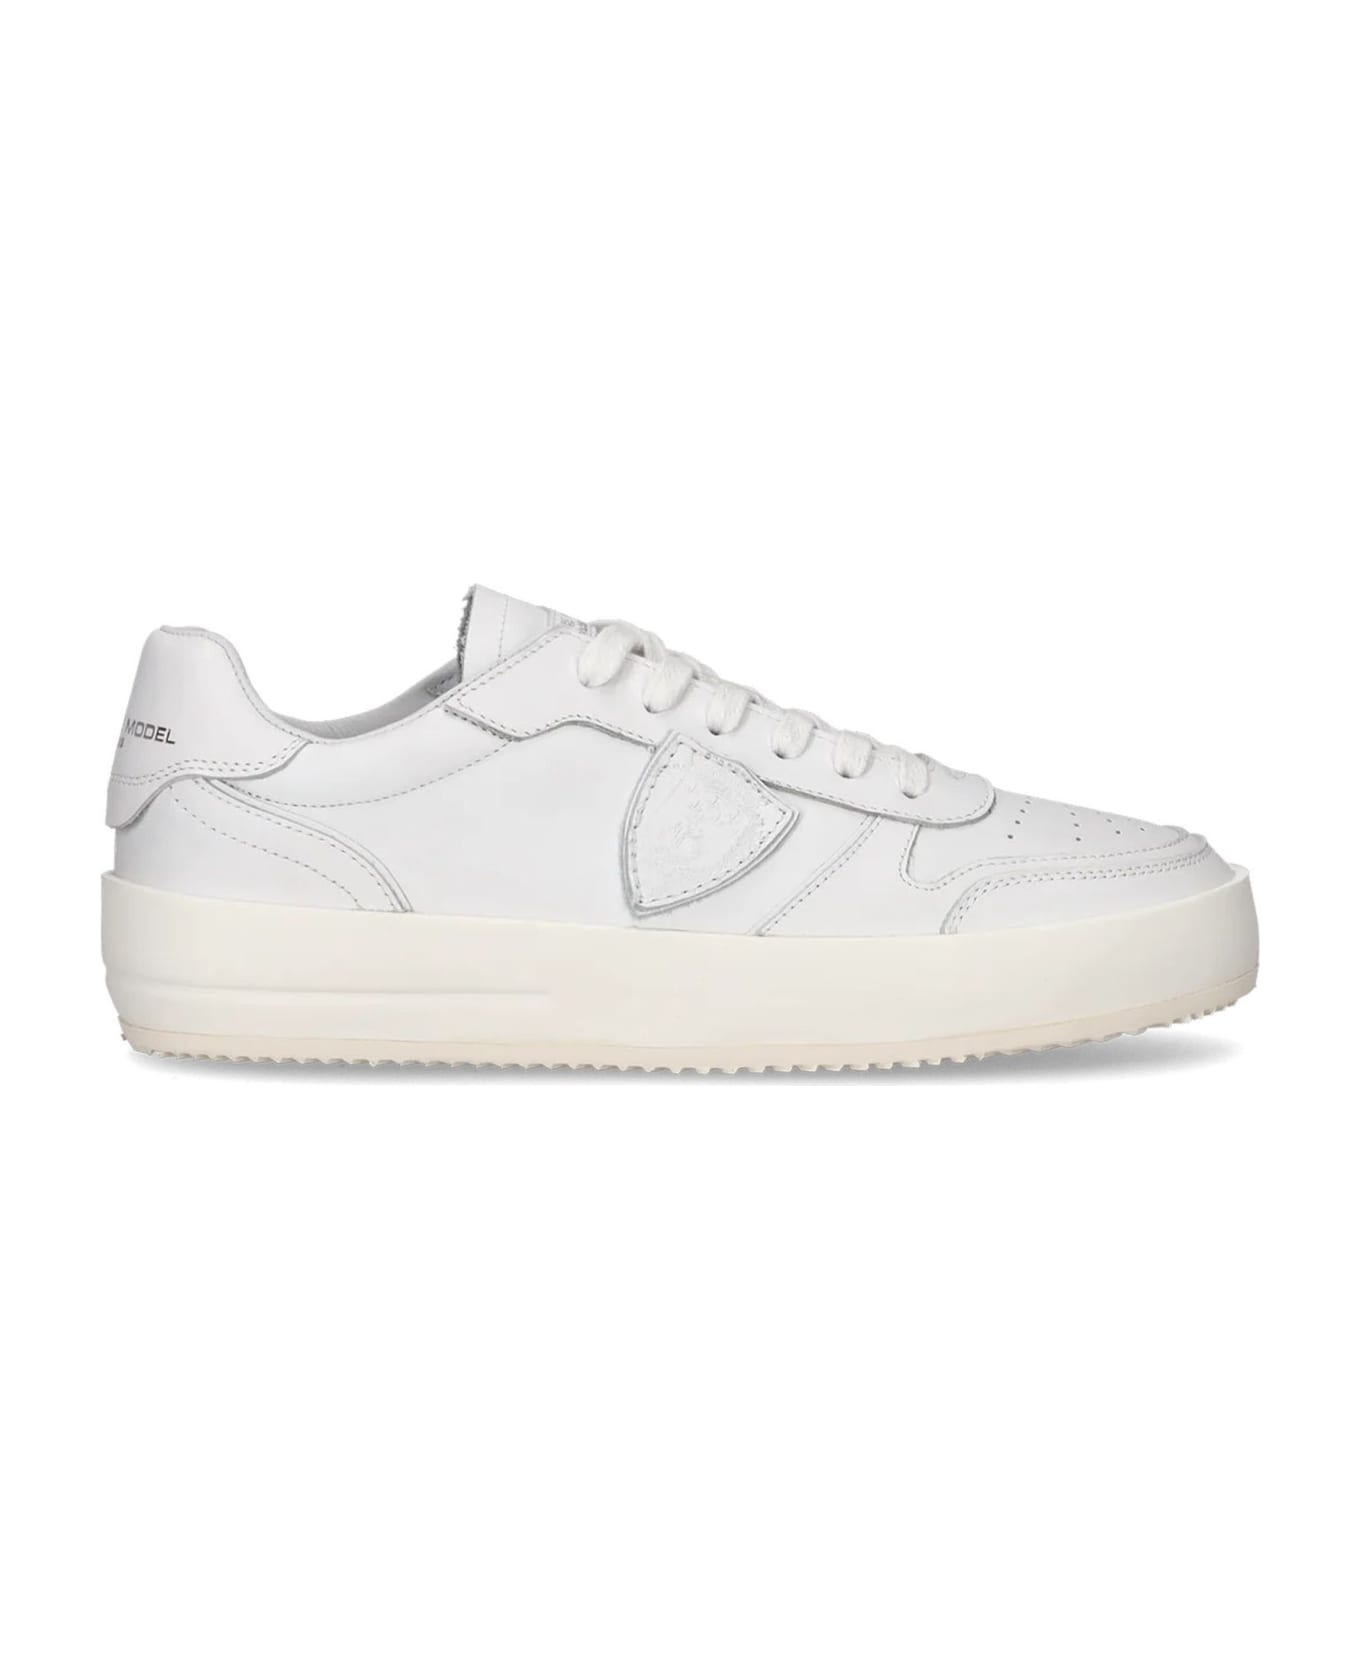 Philippe Model Nice Low-top Sneakers In Leather, White - White スニーカー